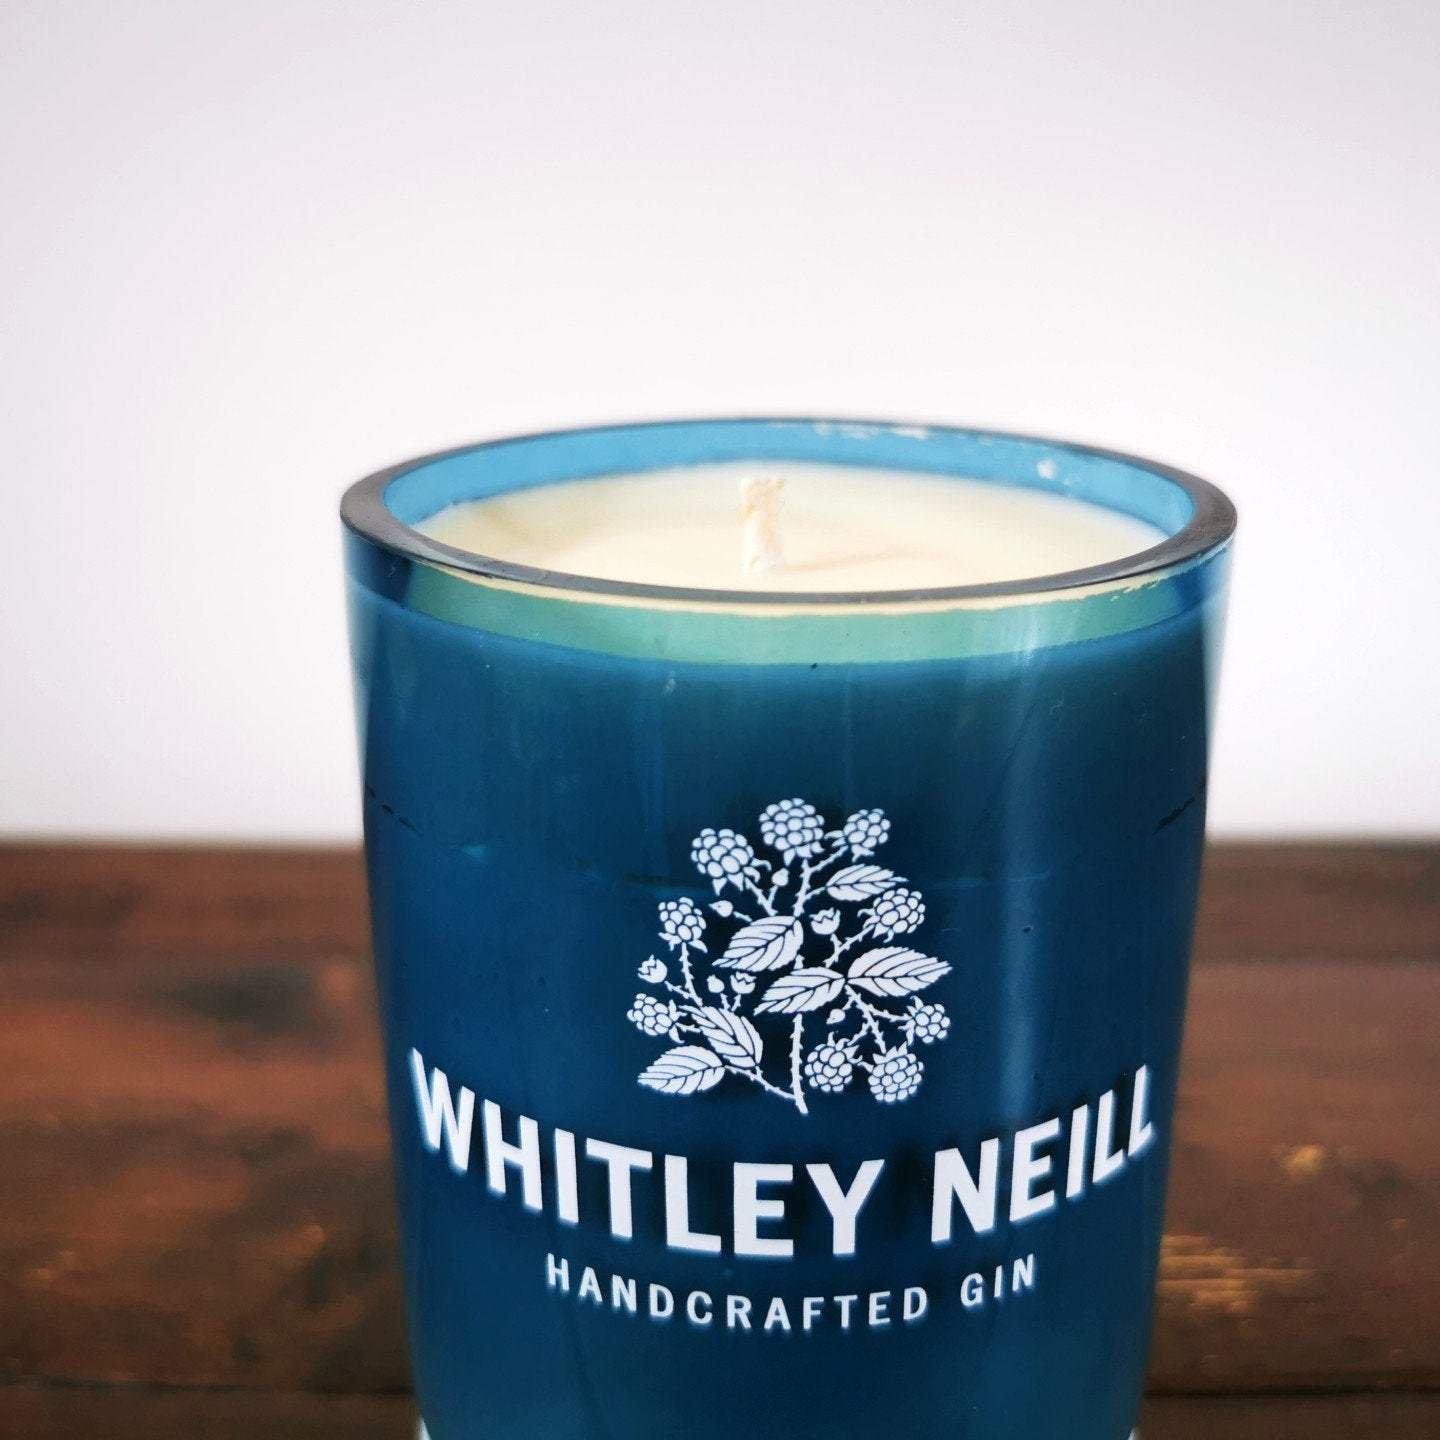 Whitley Neill Blackberry Gin Bottle Candle Gin Bottle Candles Adhock Homeware